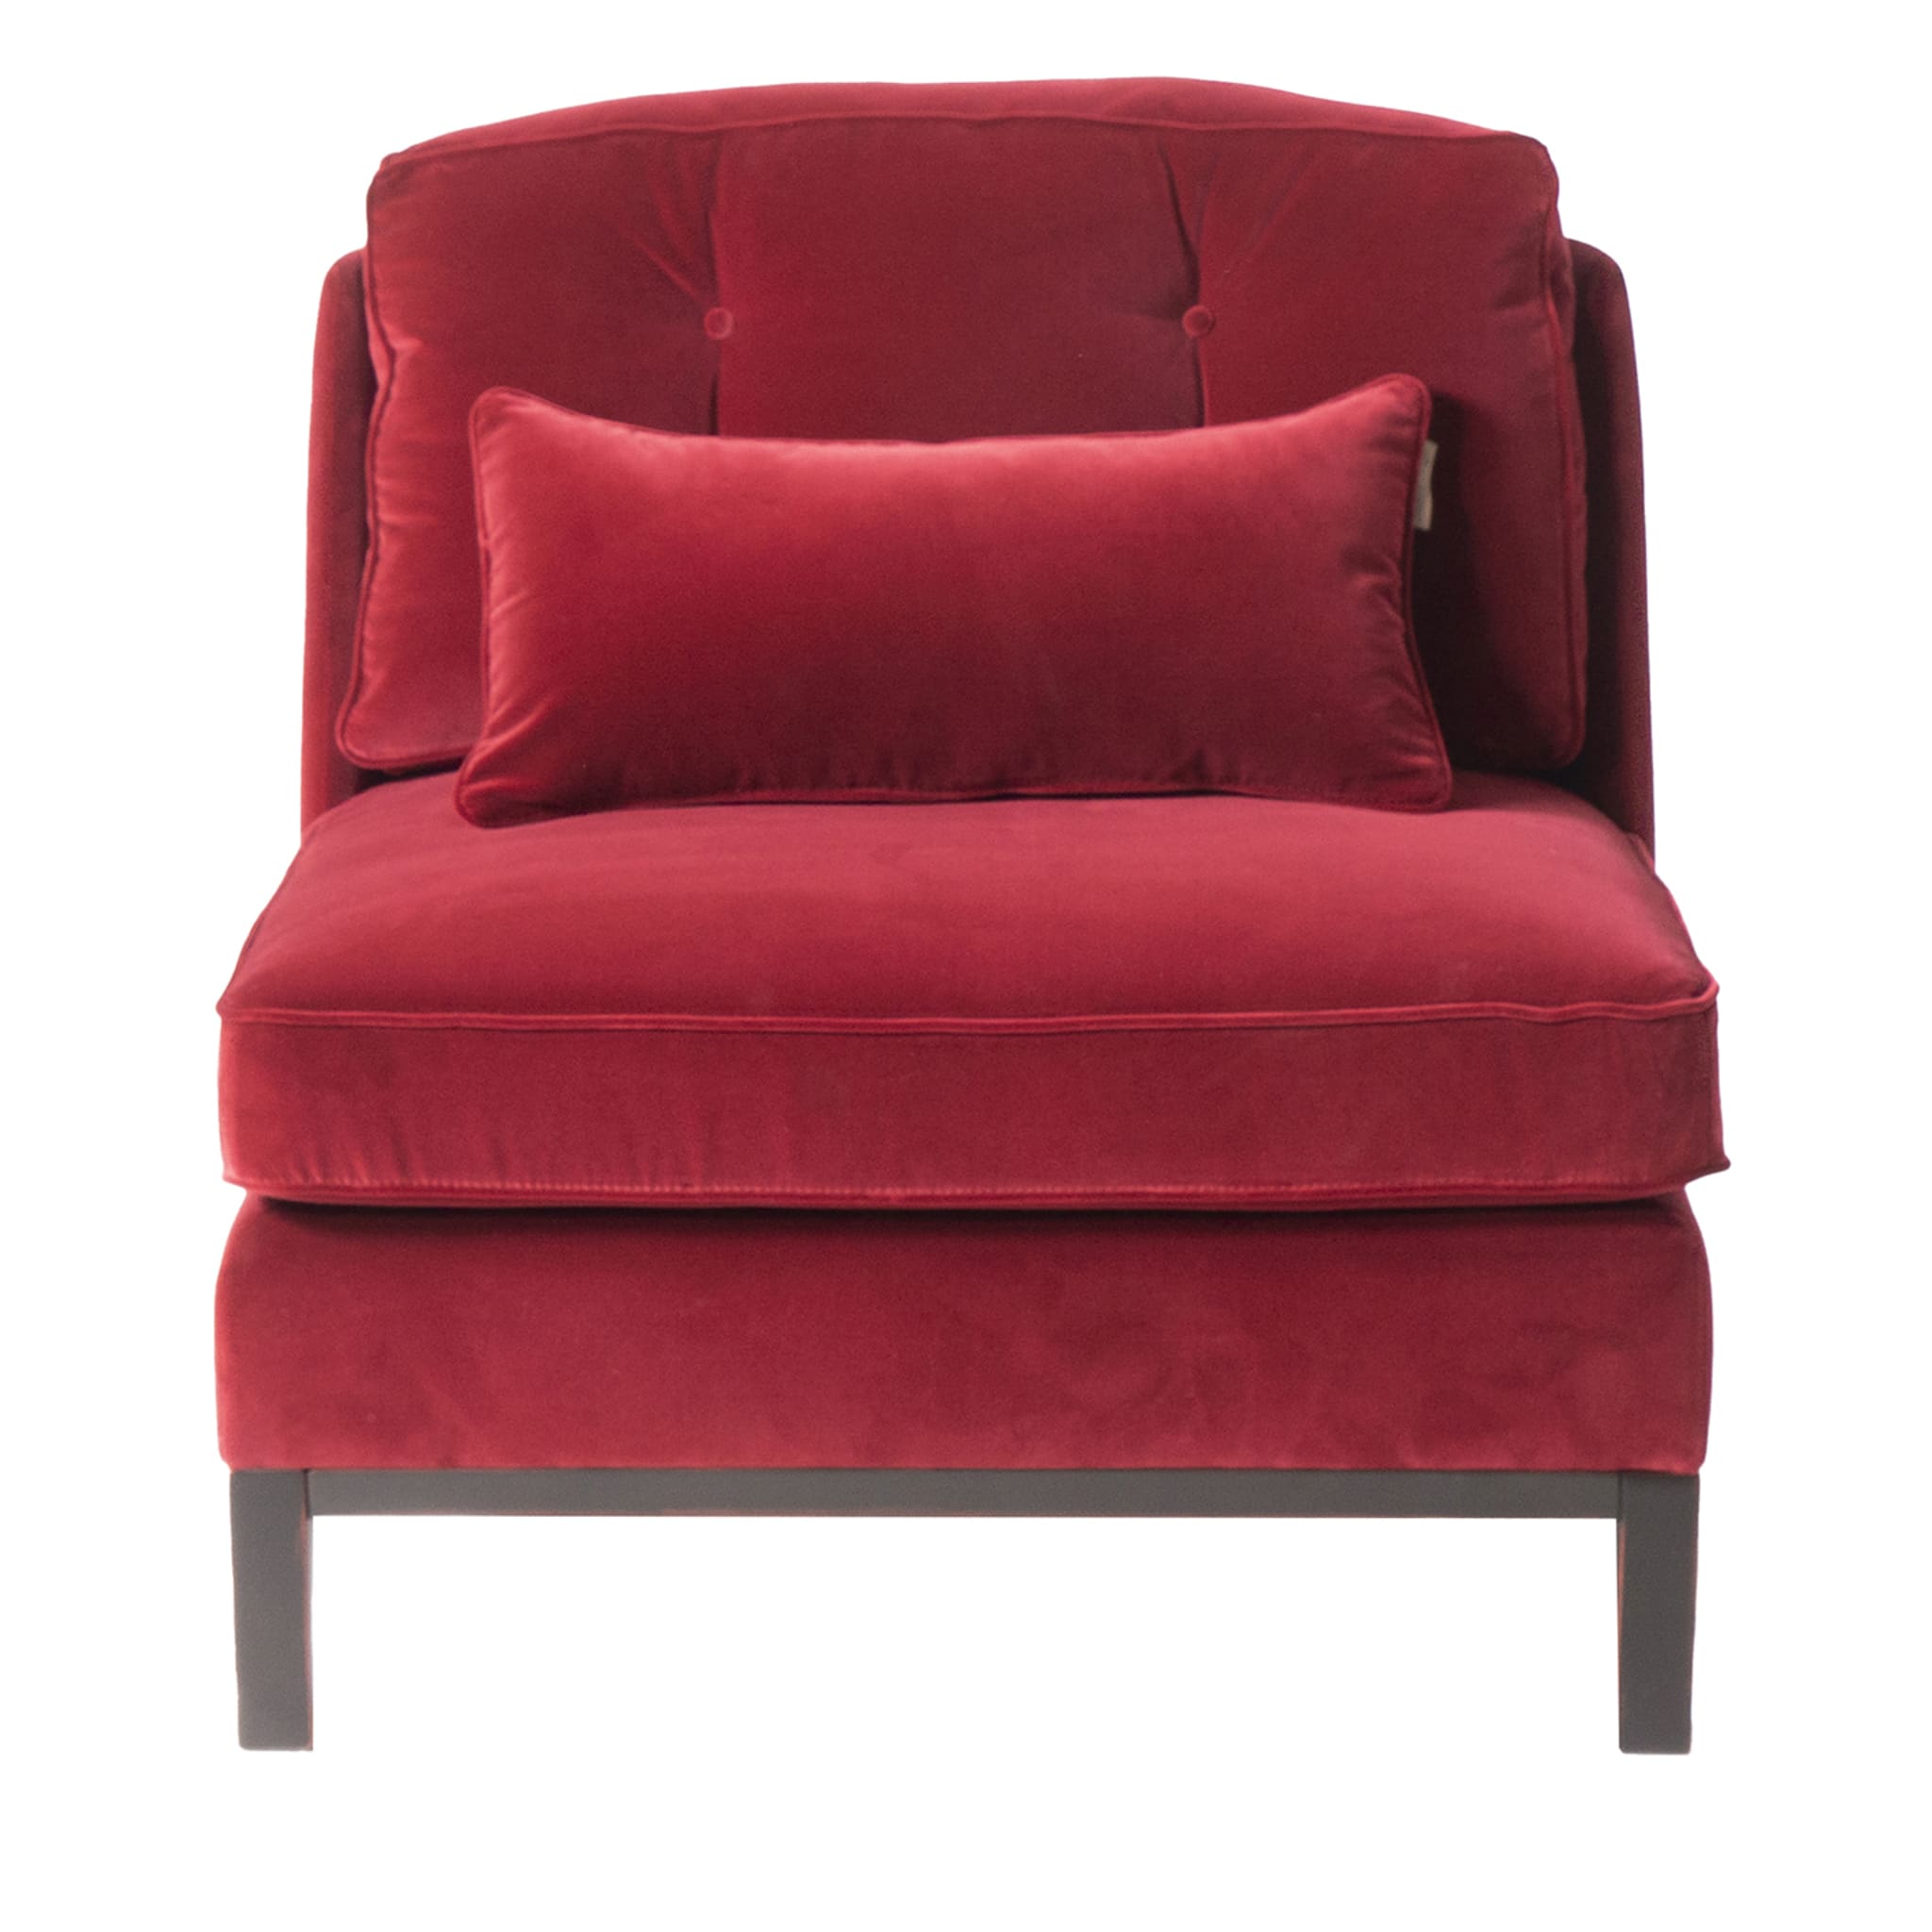 Altieri Red Armchair by Marco and Giulio Mantellassi  - Main view